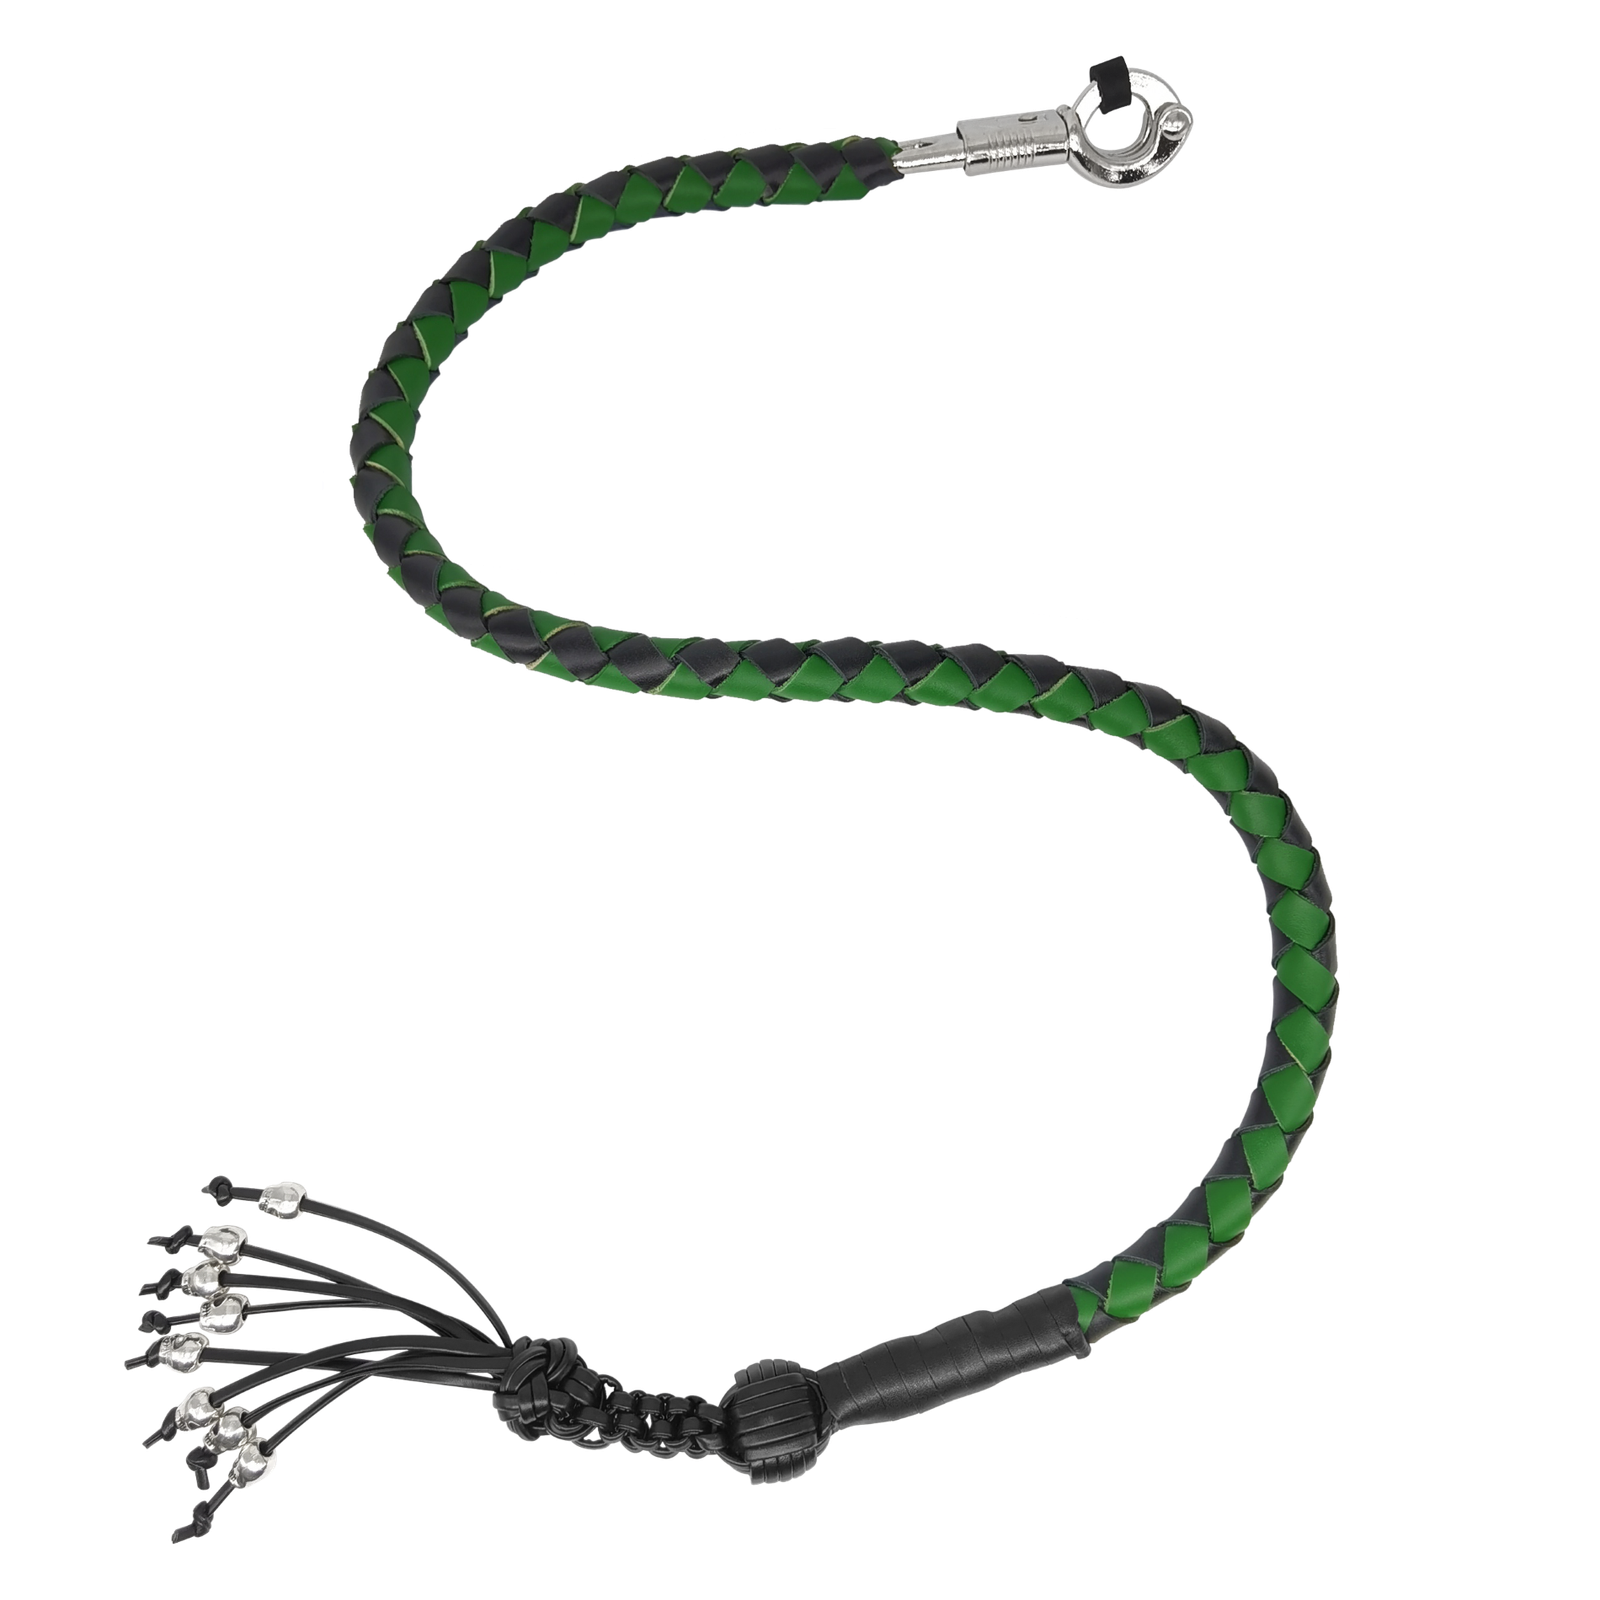 Get Back Whip - Black and Green Leather - 36 Inches - Monkey Fist and Skulls - Motorcycle Accessories - FGBW4-HS-DL